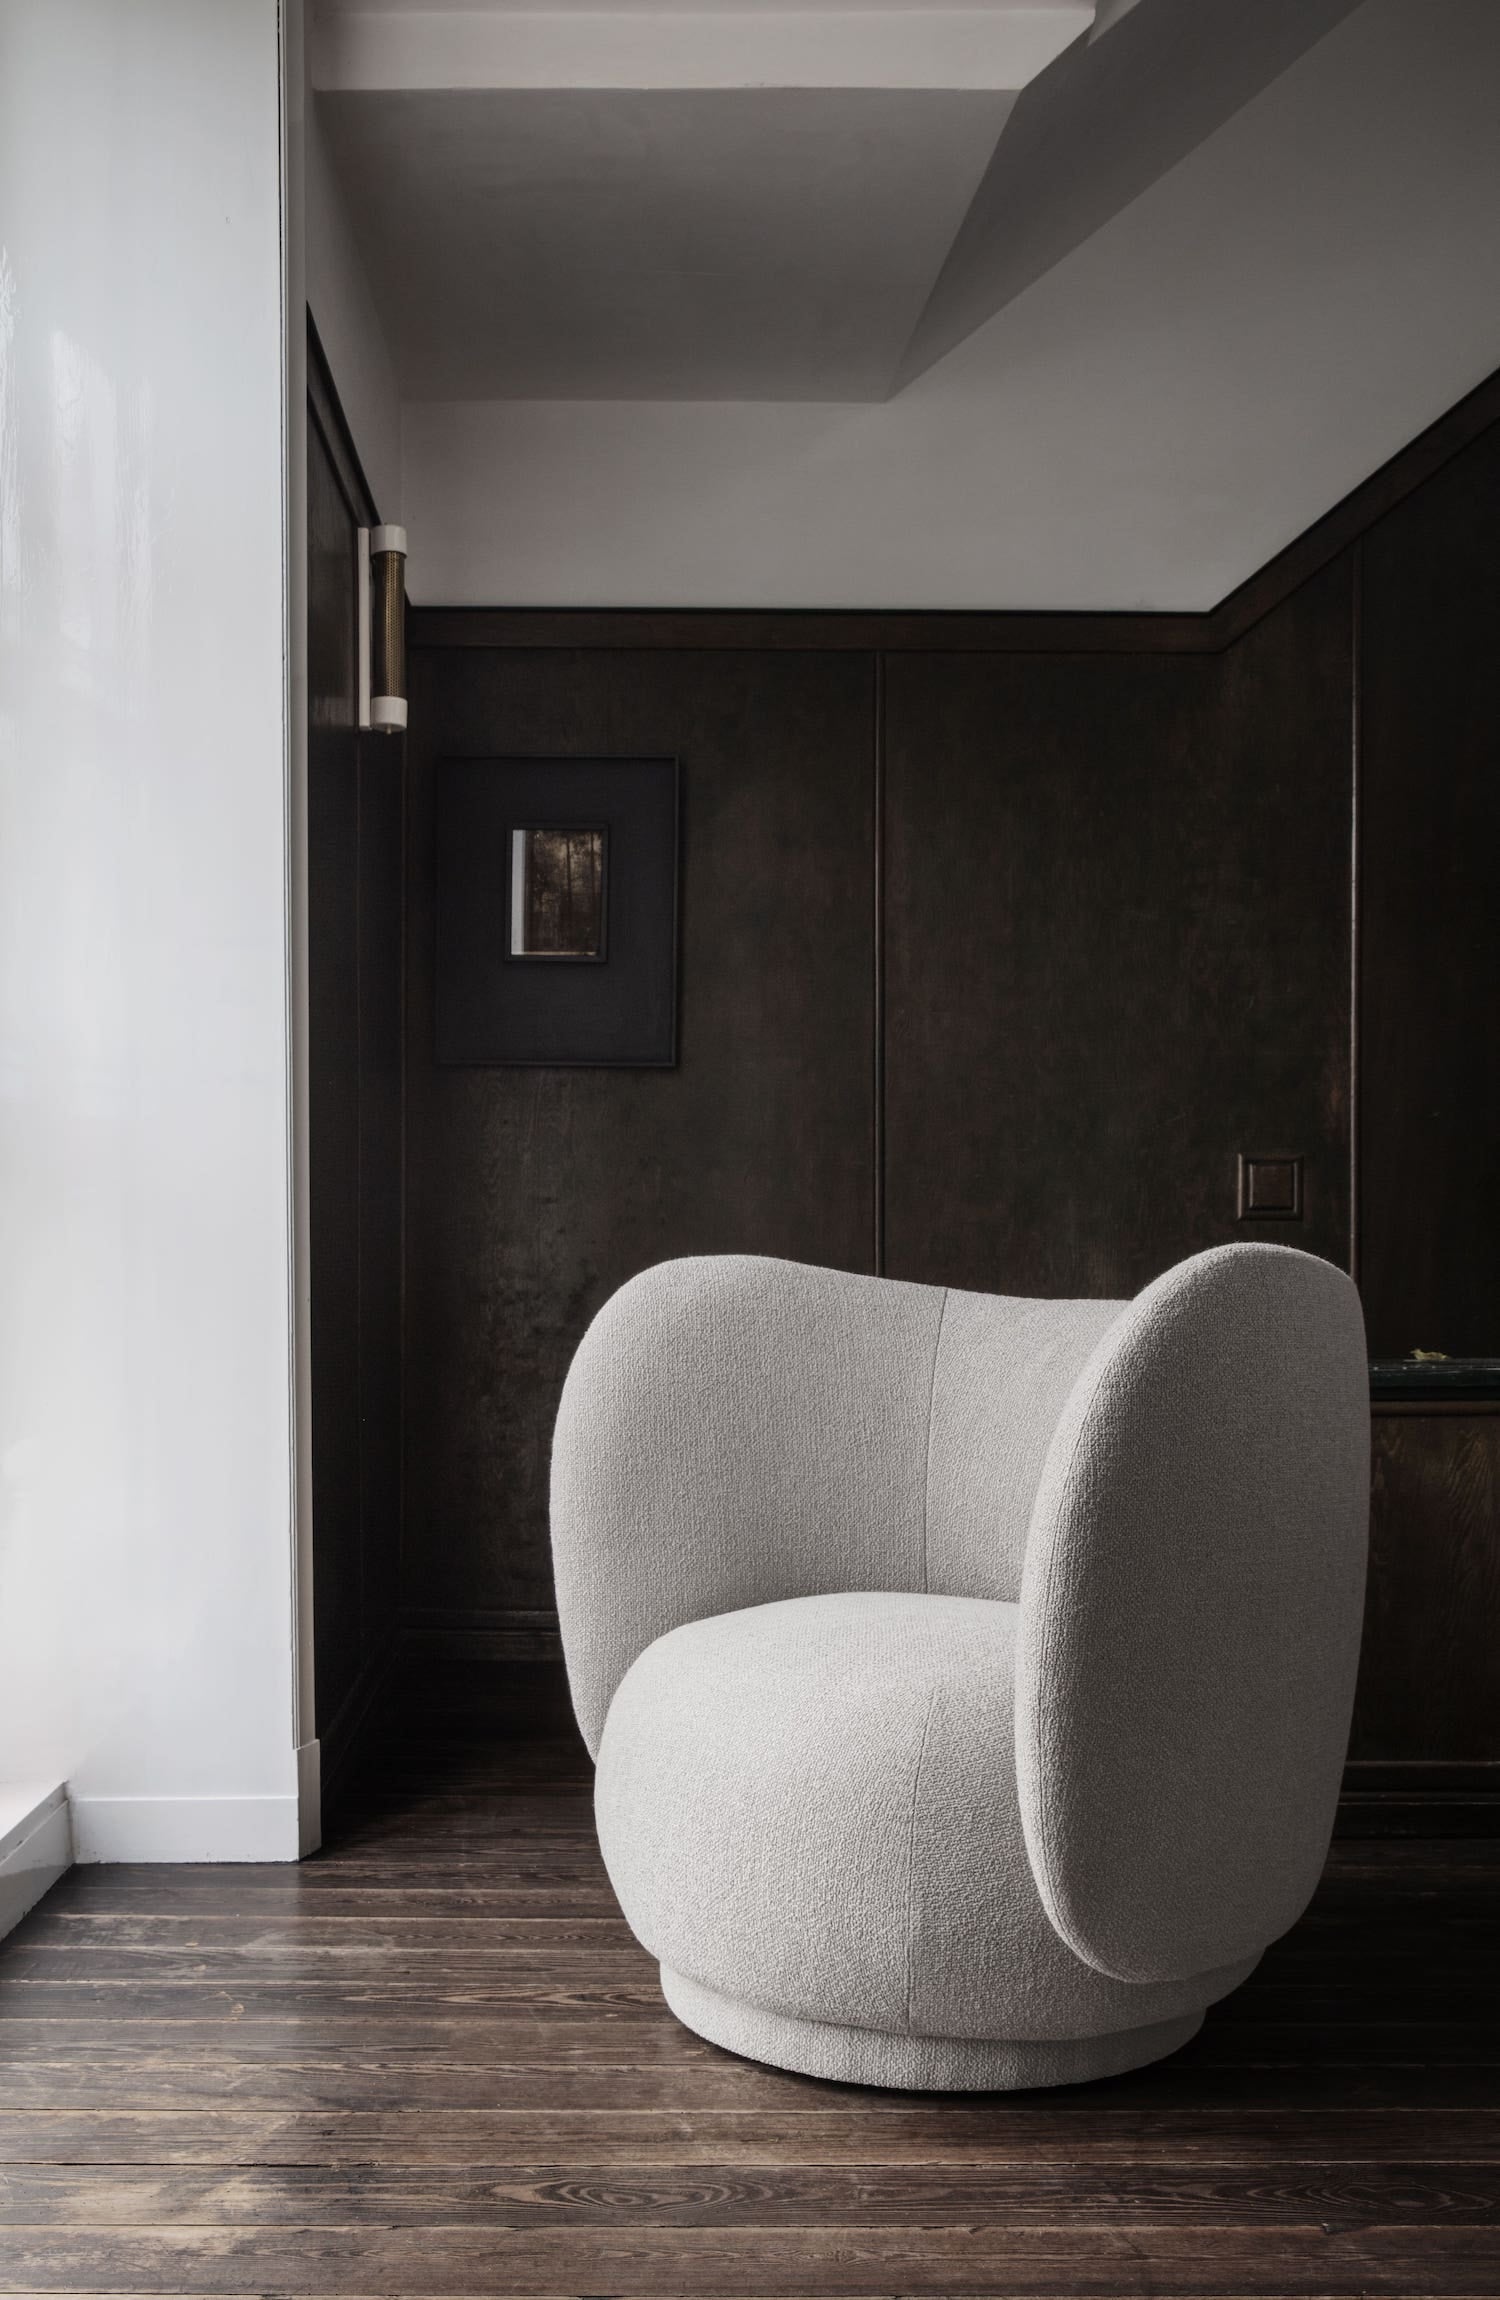 A classic design with a welcome embrace, this single seater lounge chair features deep curves and soft lines in an upholstery of timeless, easeful bouclé fabric with a rich, loopy texture in creamy off-white. 